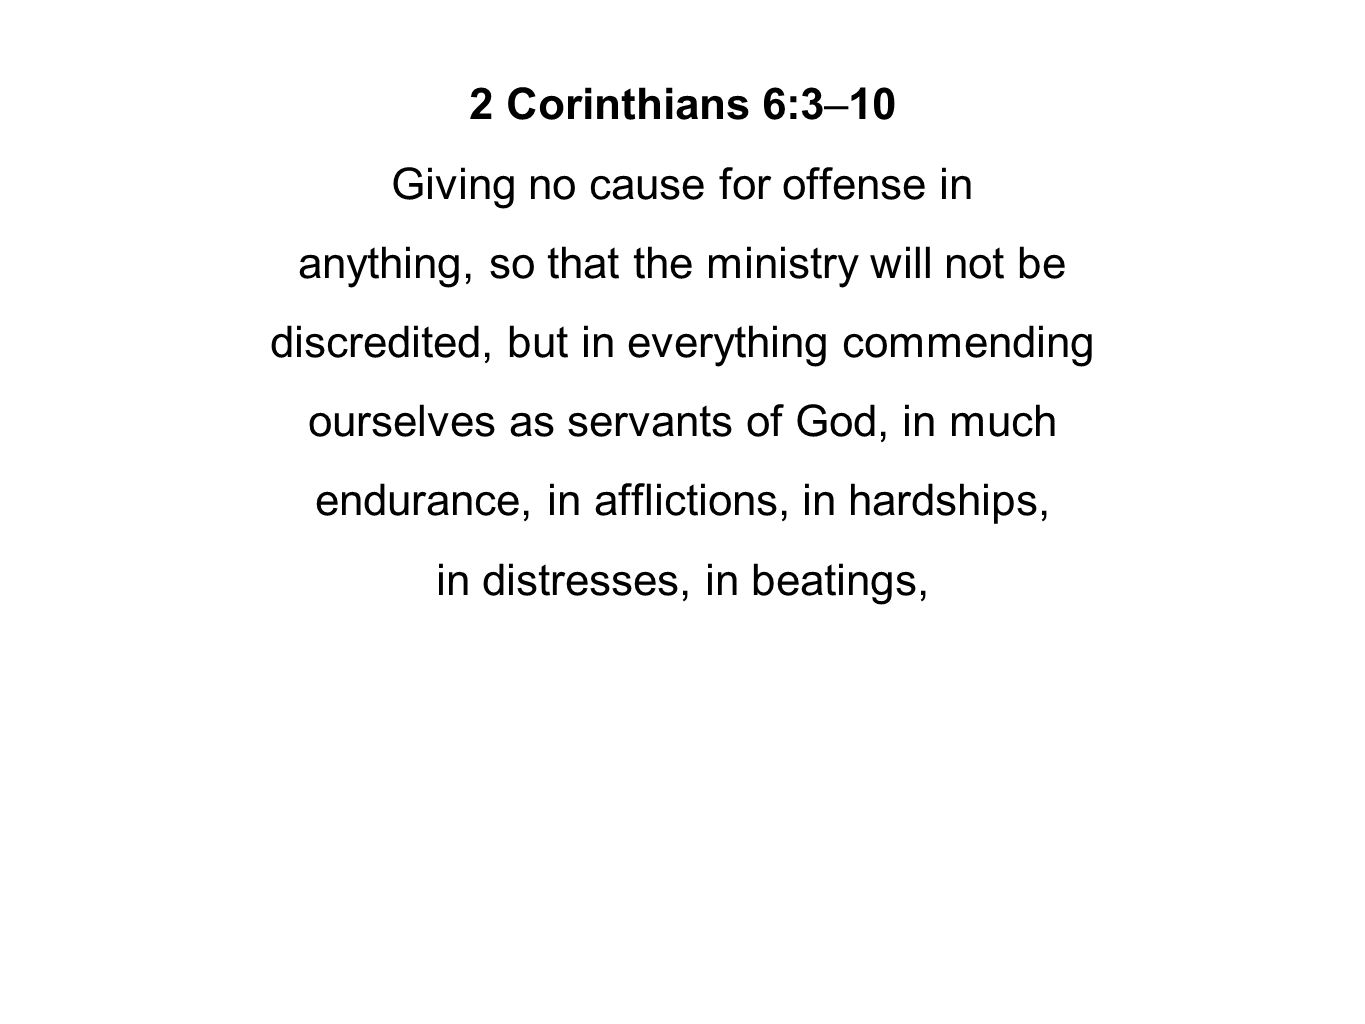 2 Corinthians 6:3–10 Giving no cause for offense in anything, so that the ministry will not be discredited, but in everything commending ourselves as servants of God, in much endurance, in afflictions, in hardships, in distresses, in beatings,